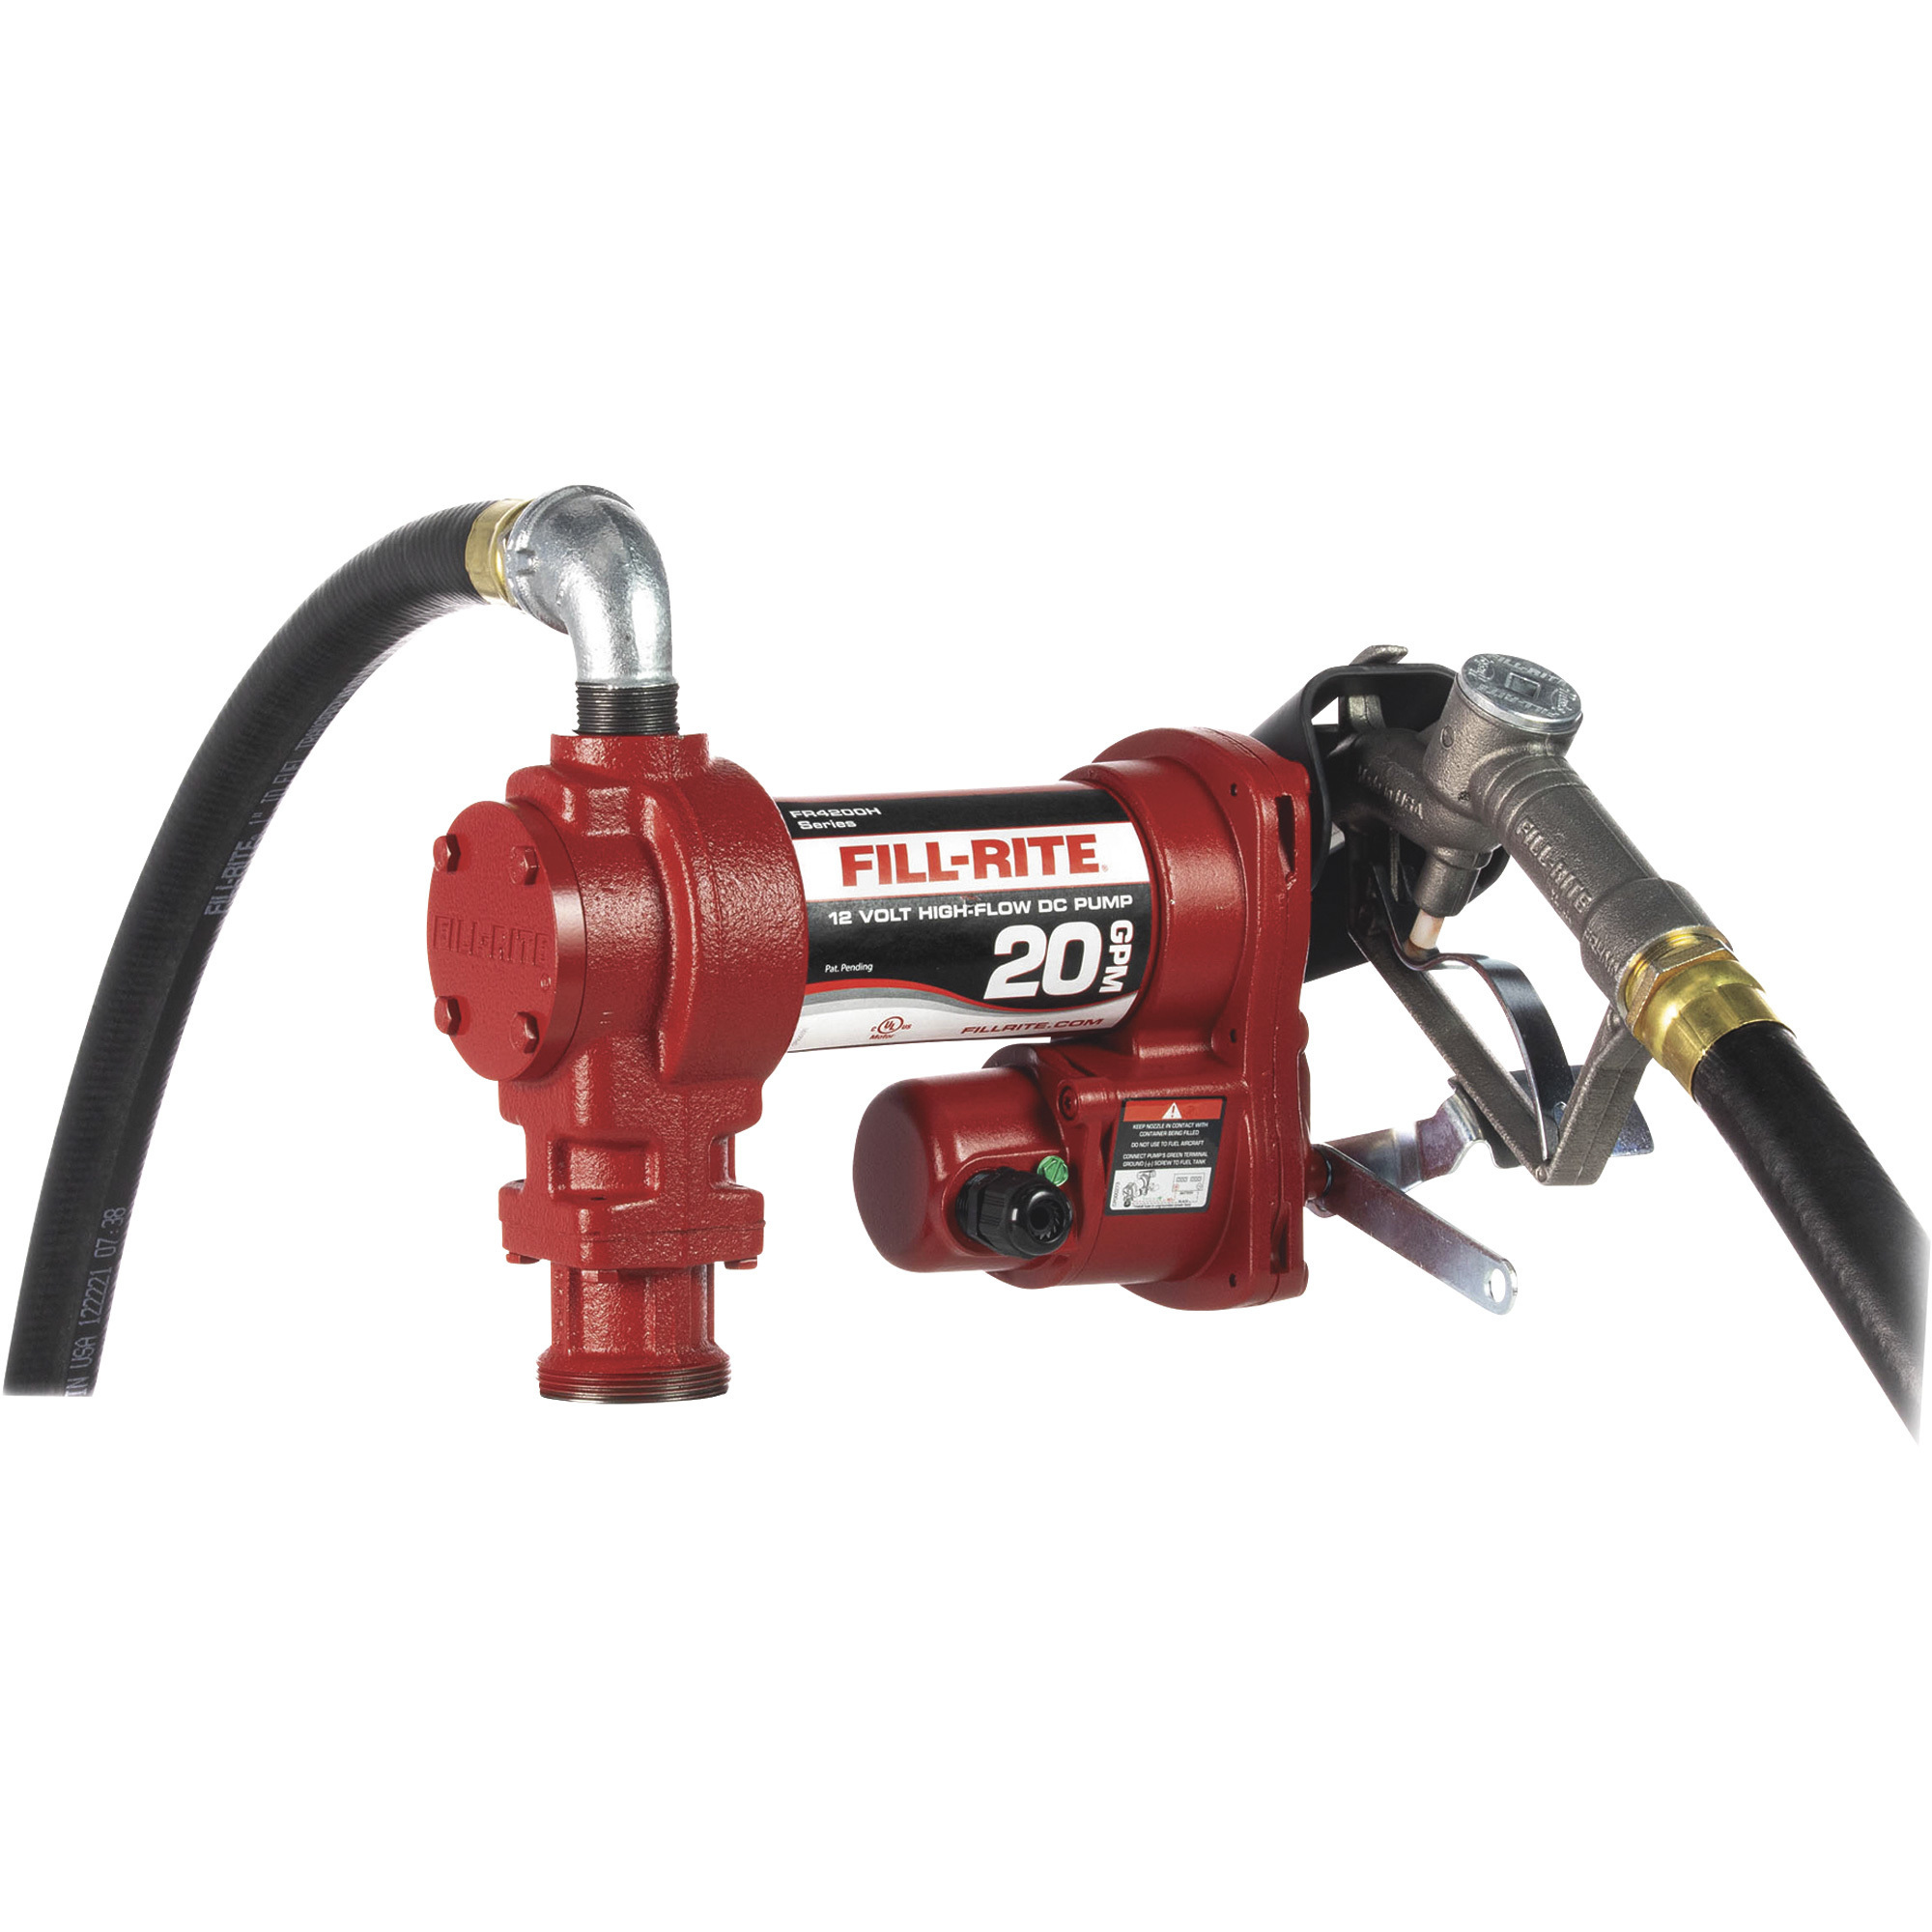 Fill-Rite 12V DC Fuel Transfer Pump Kit — 20 GPM, 1in. Manual Nozzle, 1in.  x 12ft. Hose, Model# FR4210H